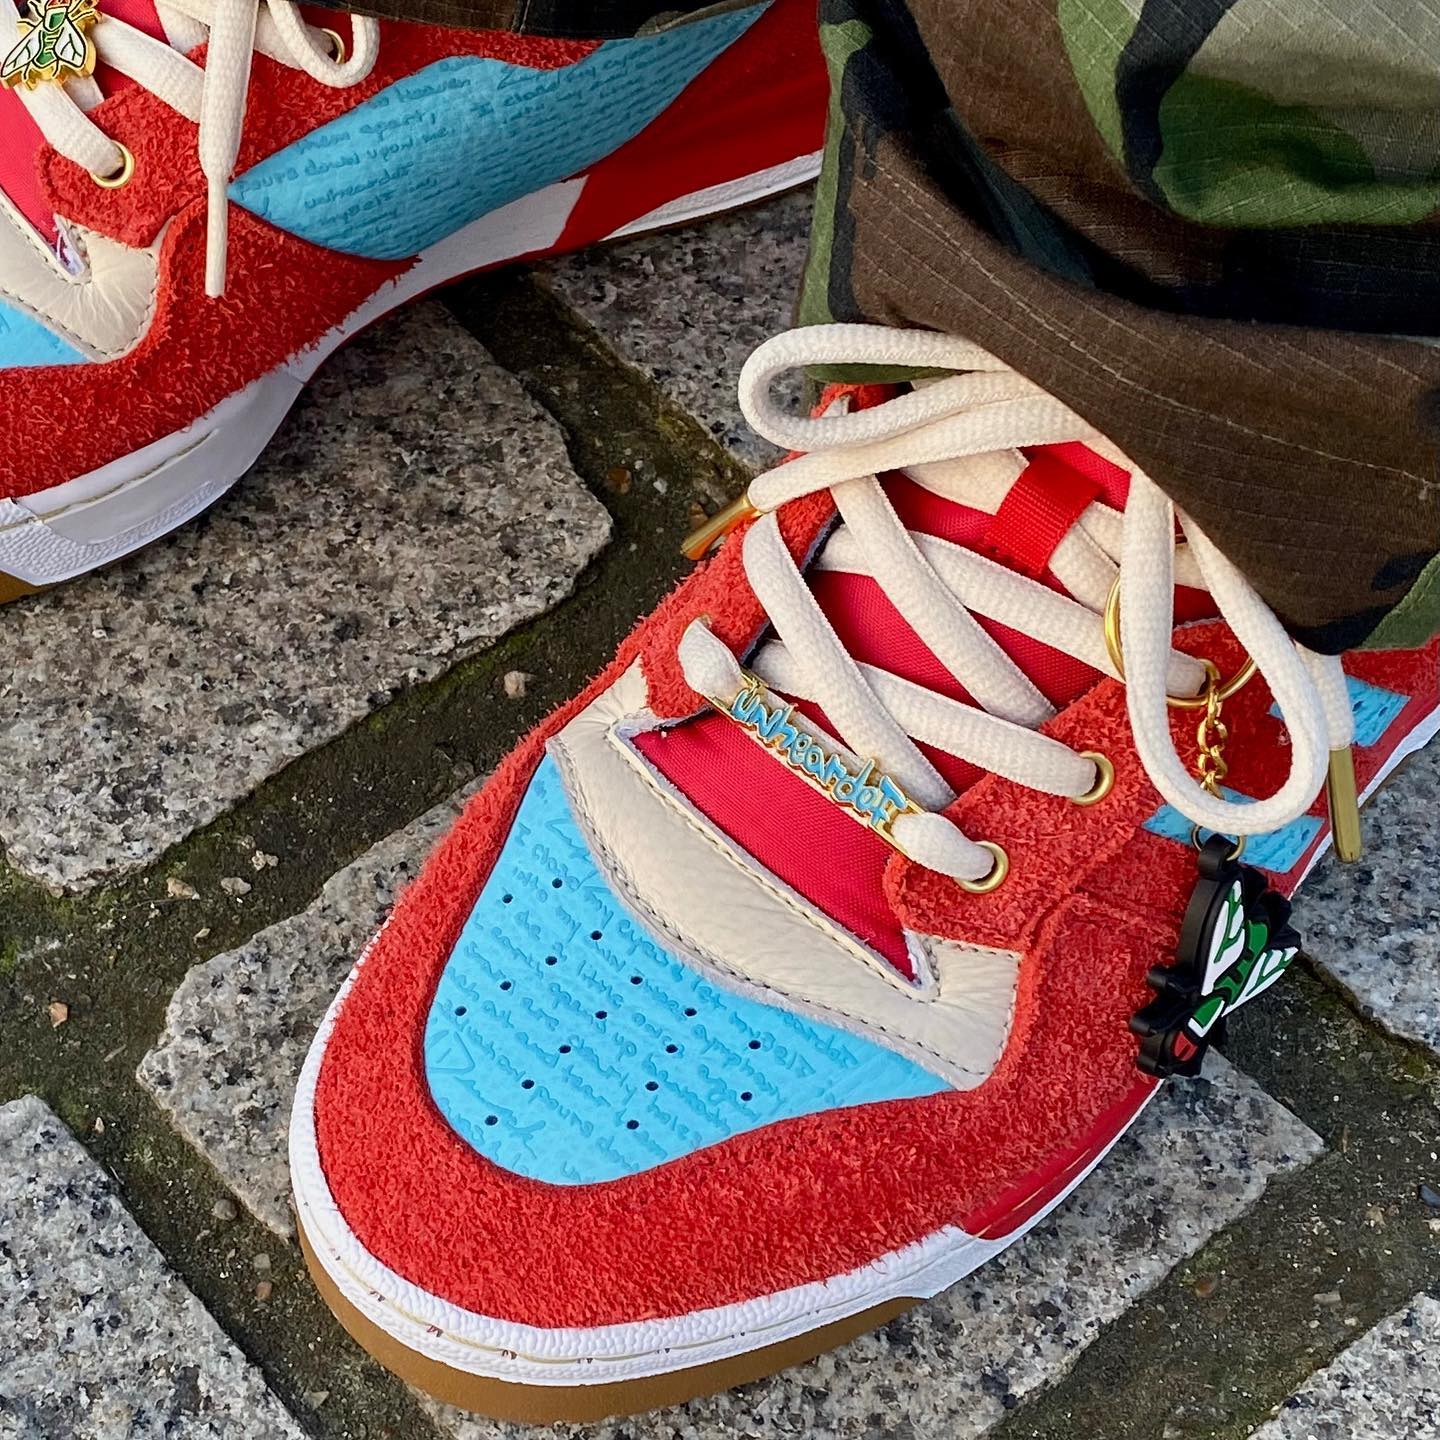 Modern Notoriety on X: On-feet look at the Off-White x Nike Air